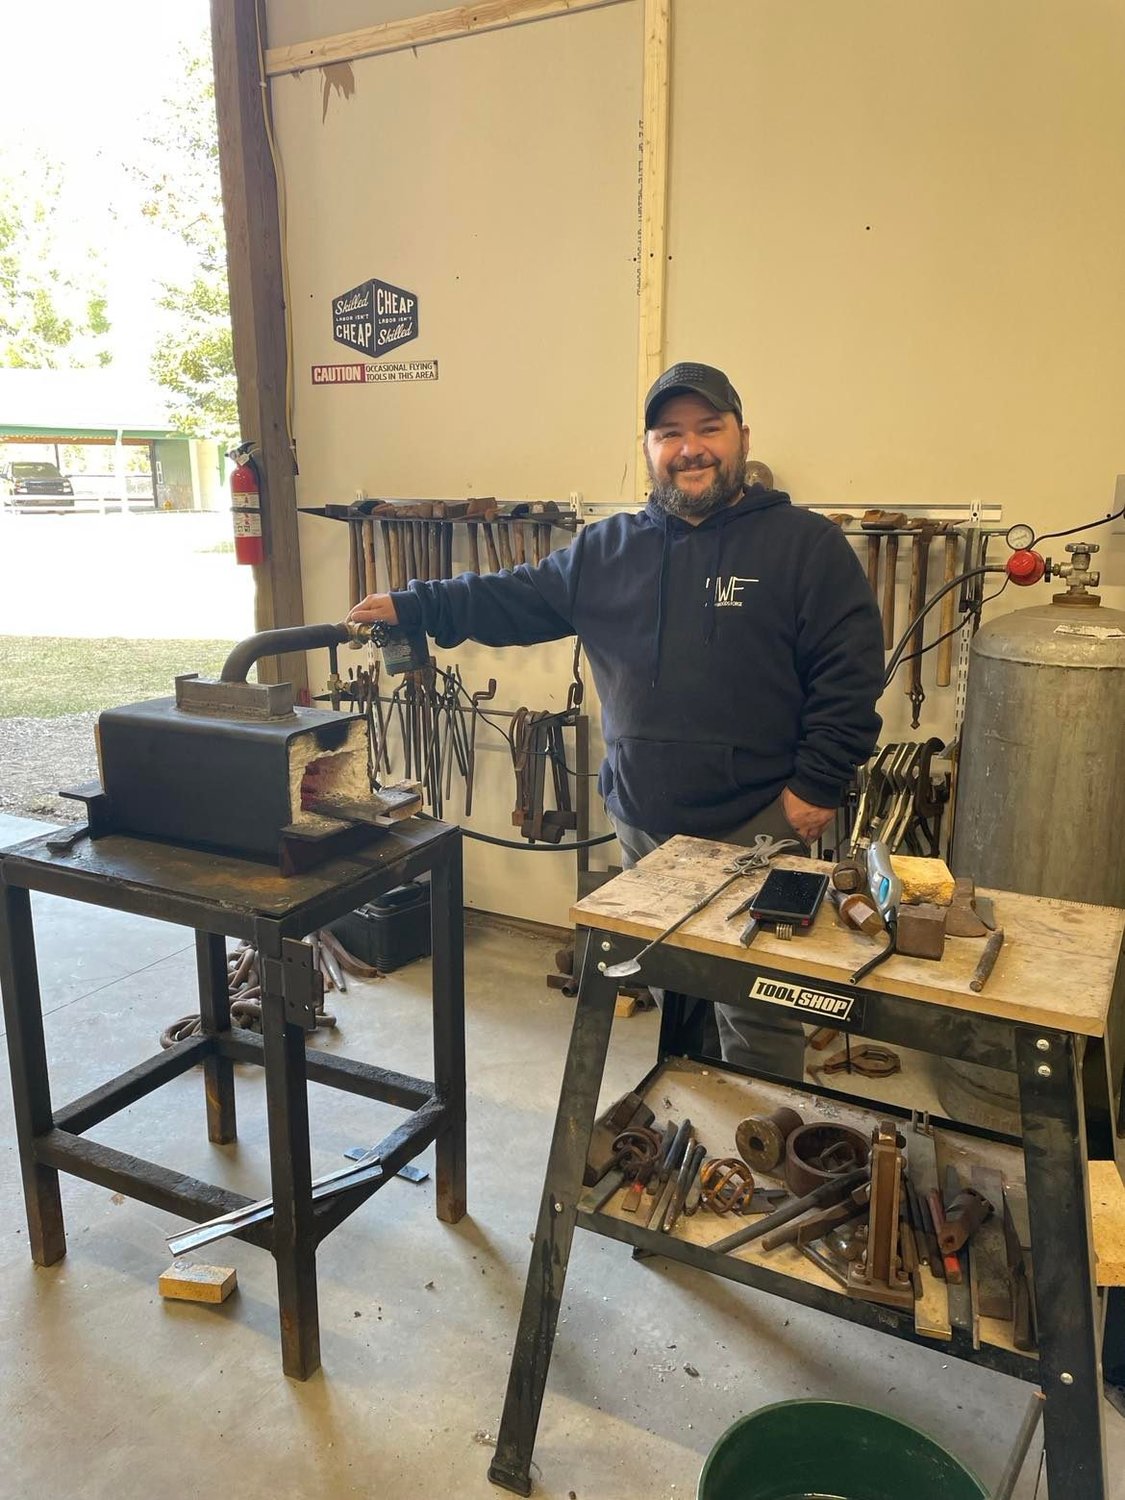 David McConnell stands among the tongs, hammers and other tools made and used by him in his forge. McConnell has made most items in his workshop.